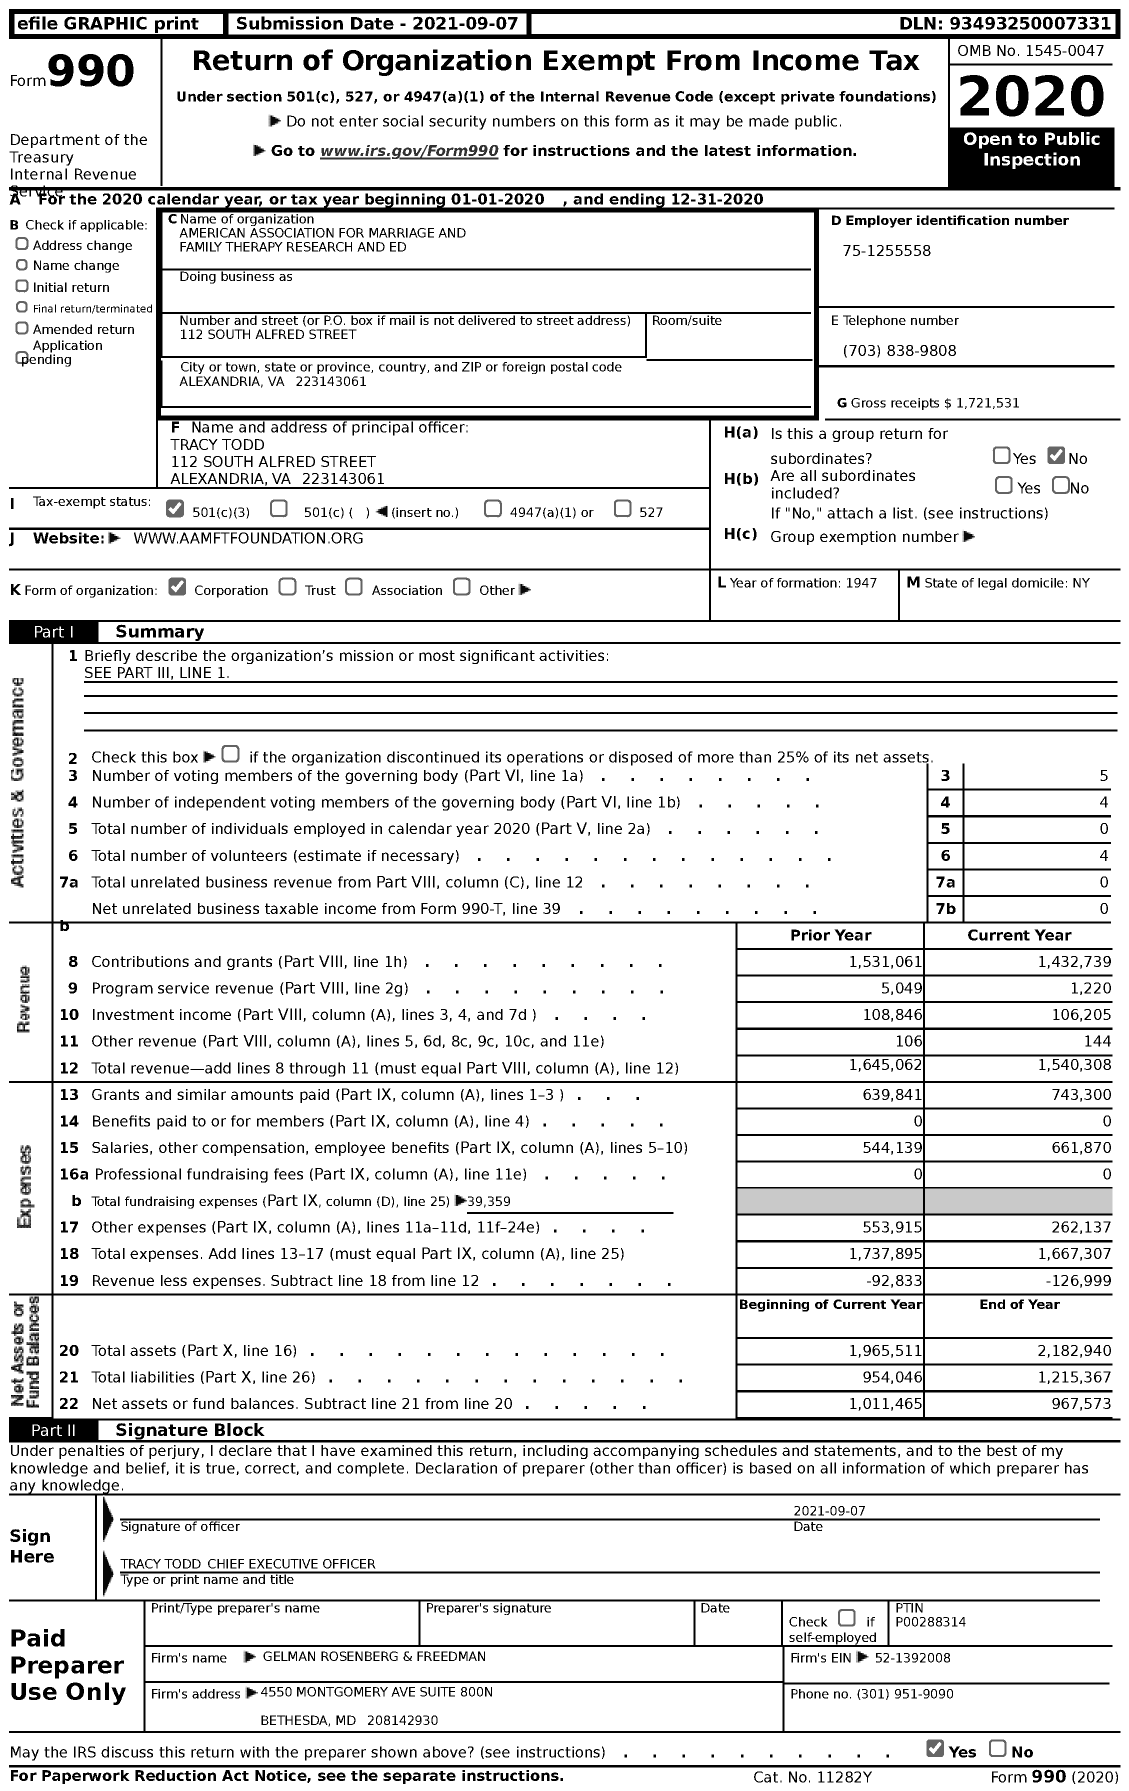 Image of first page of 2020 Form 990 for American Association for Marriage and Family Therapy Research and Ed